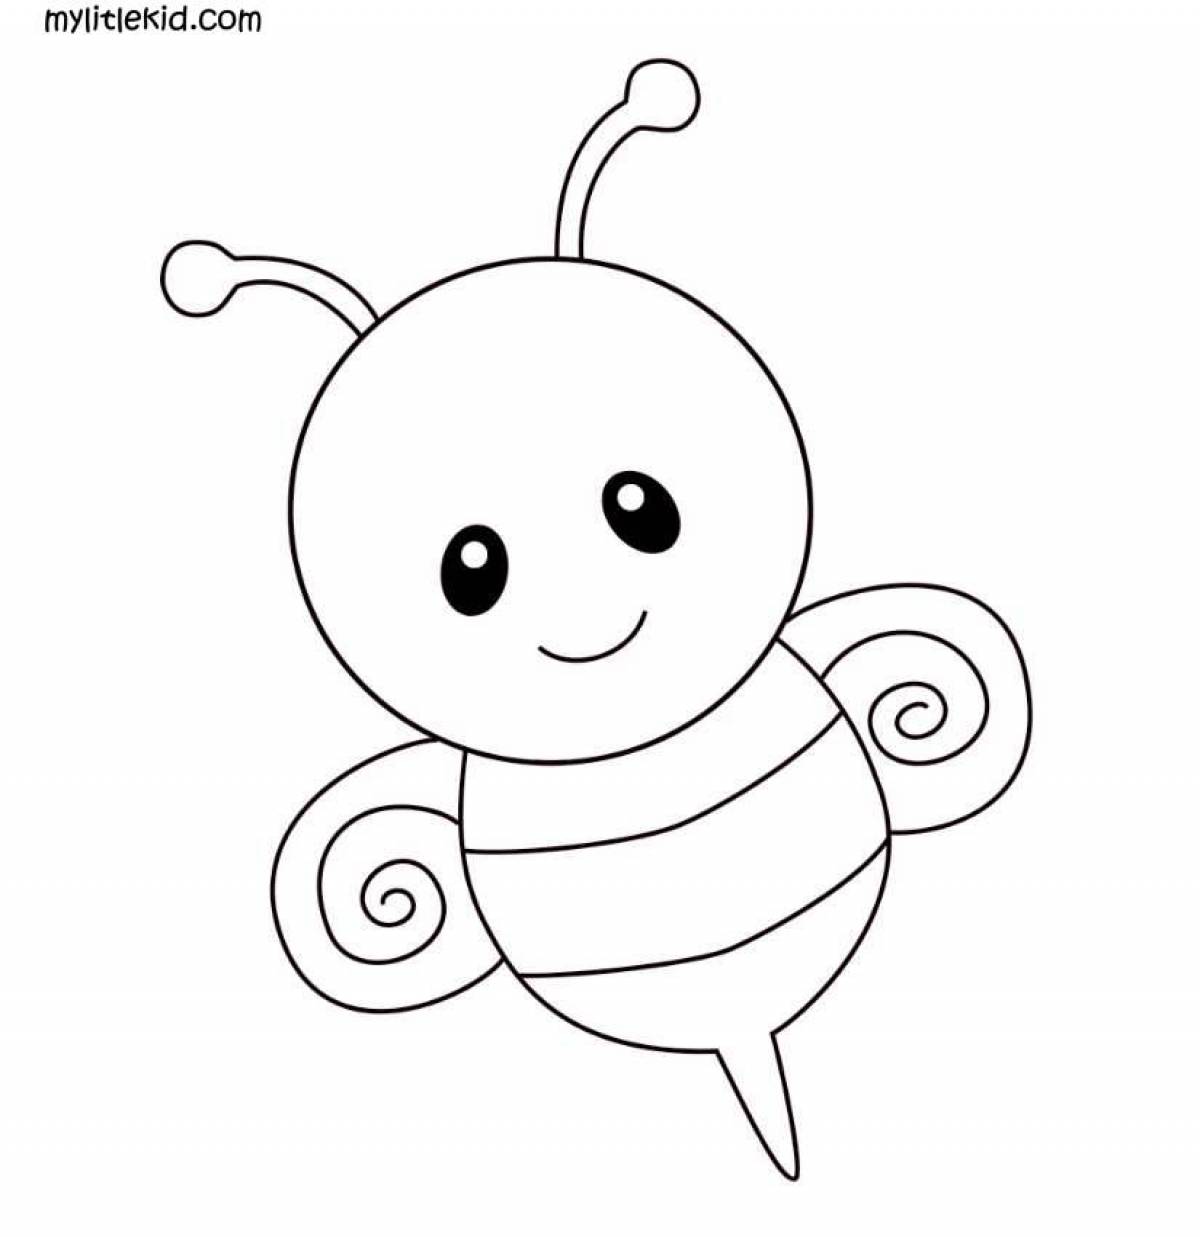 Great pug caterpillar coloring page